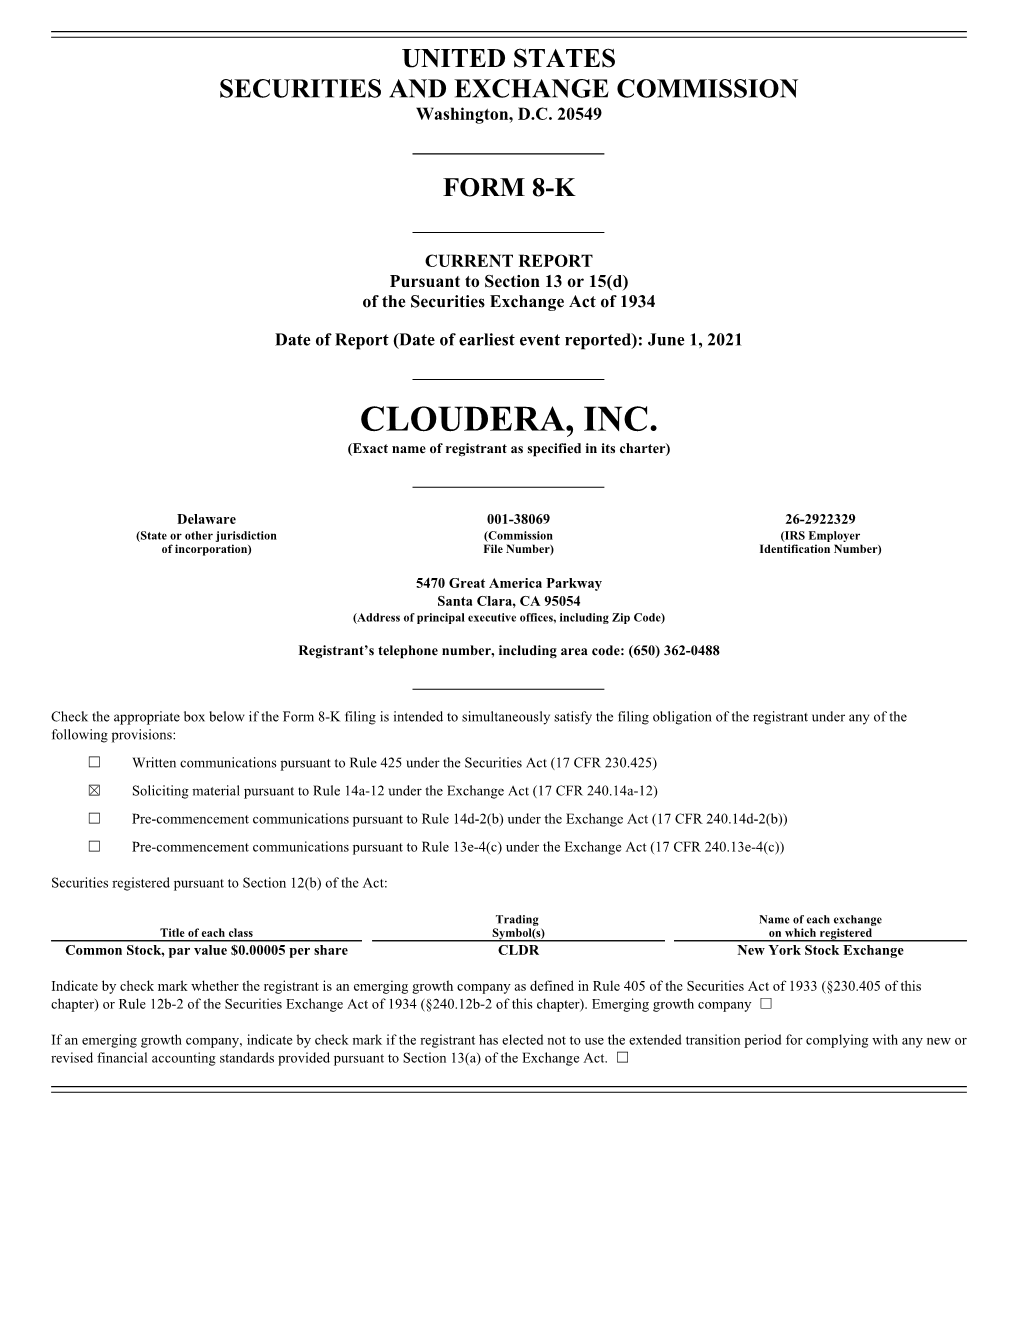 CLOUDERA, INC. (Exact Name of Registrant As Specified in Its Charter)